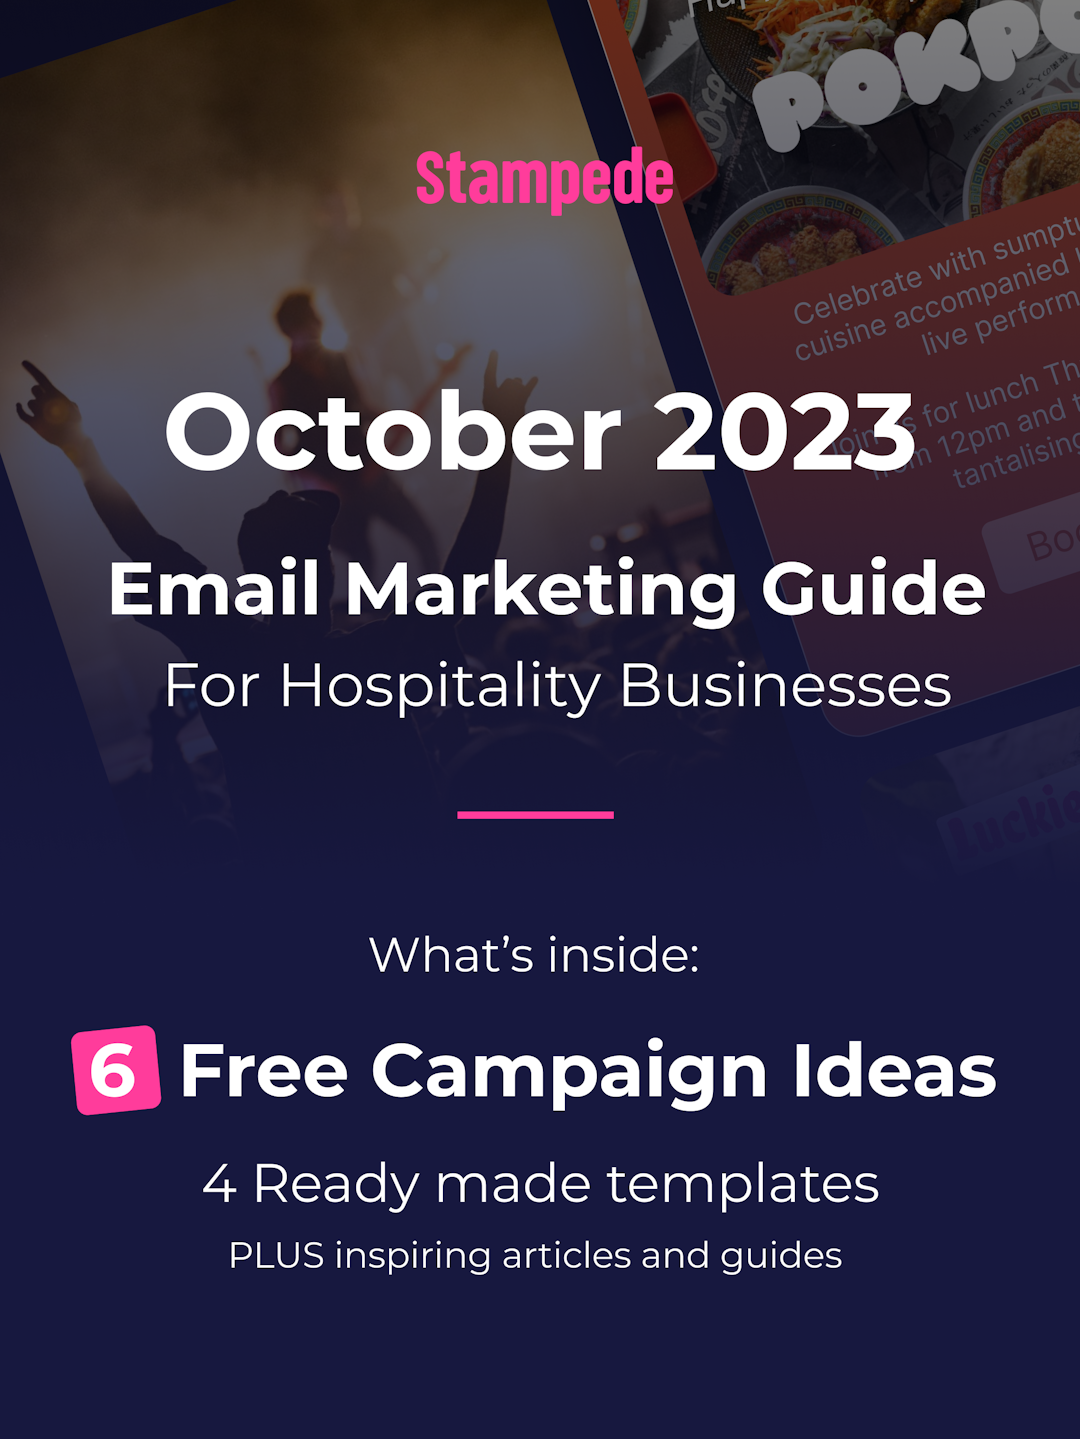 October 2023 Email Marketing Guide